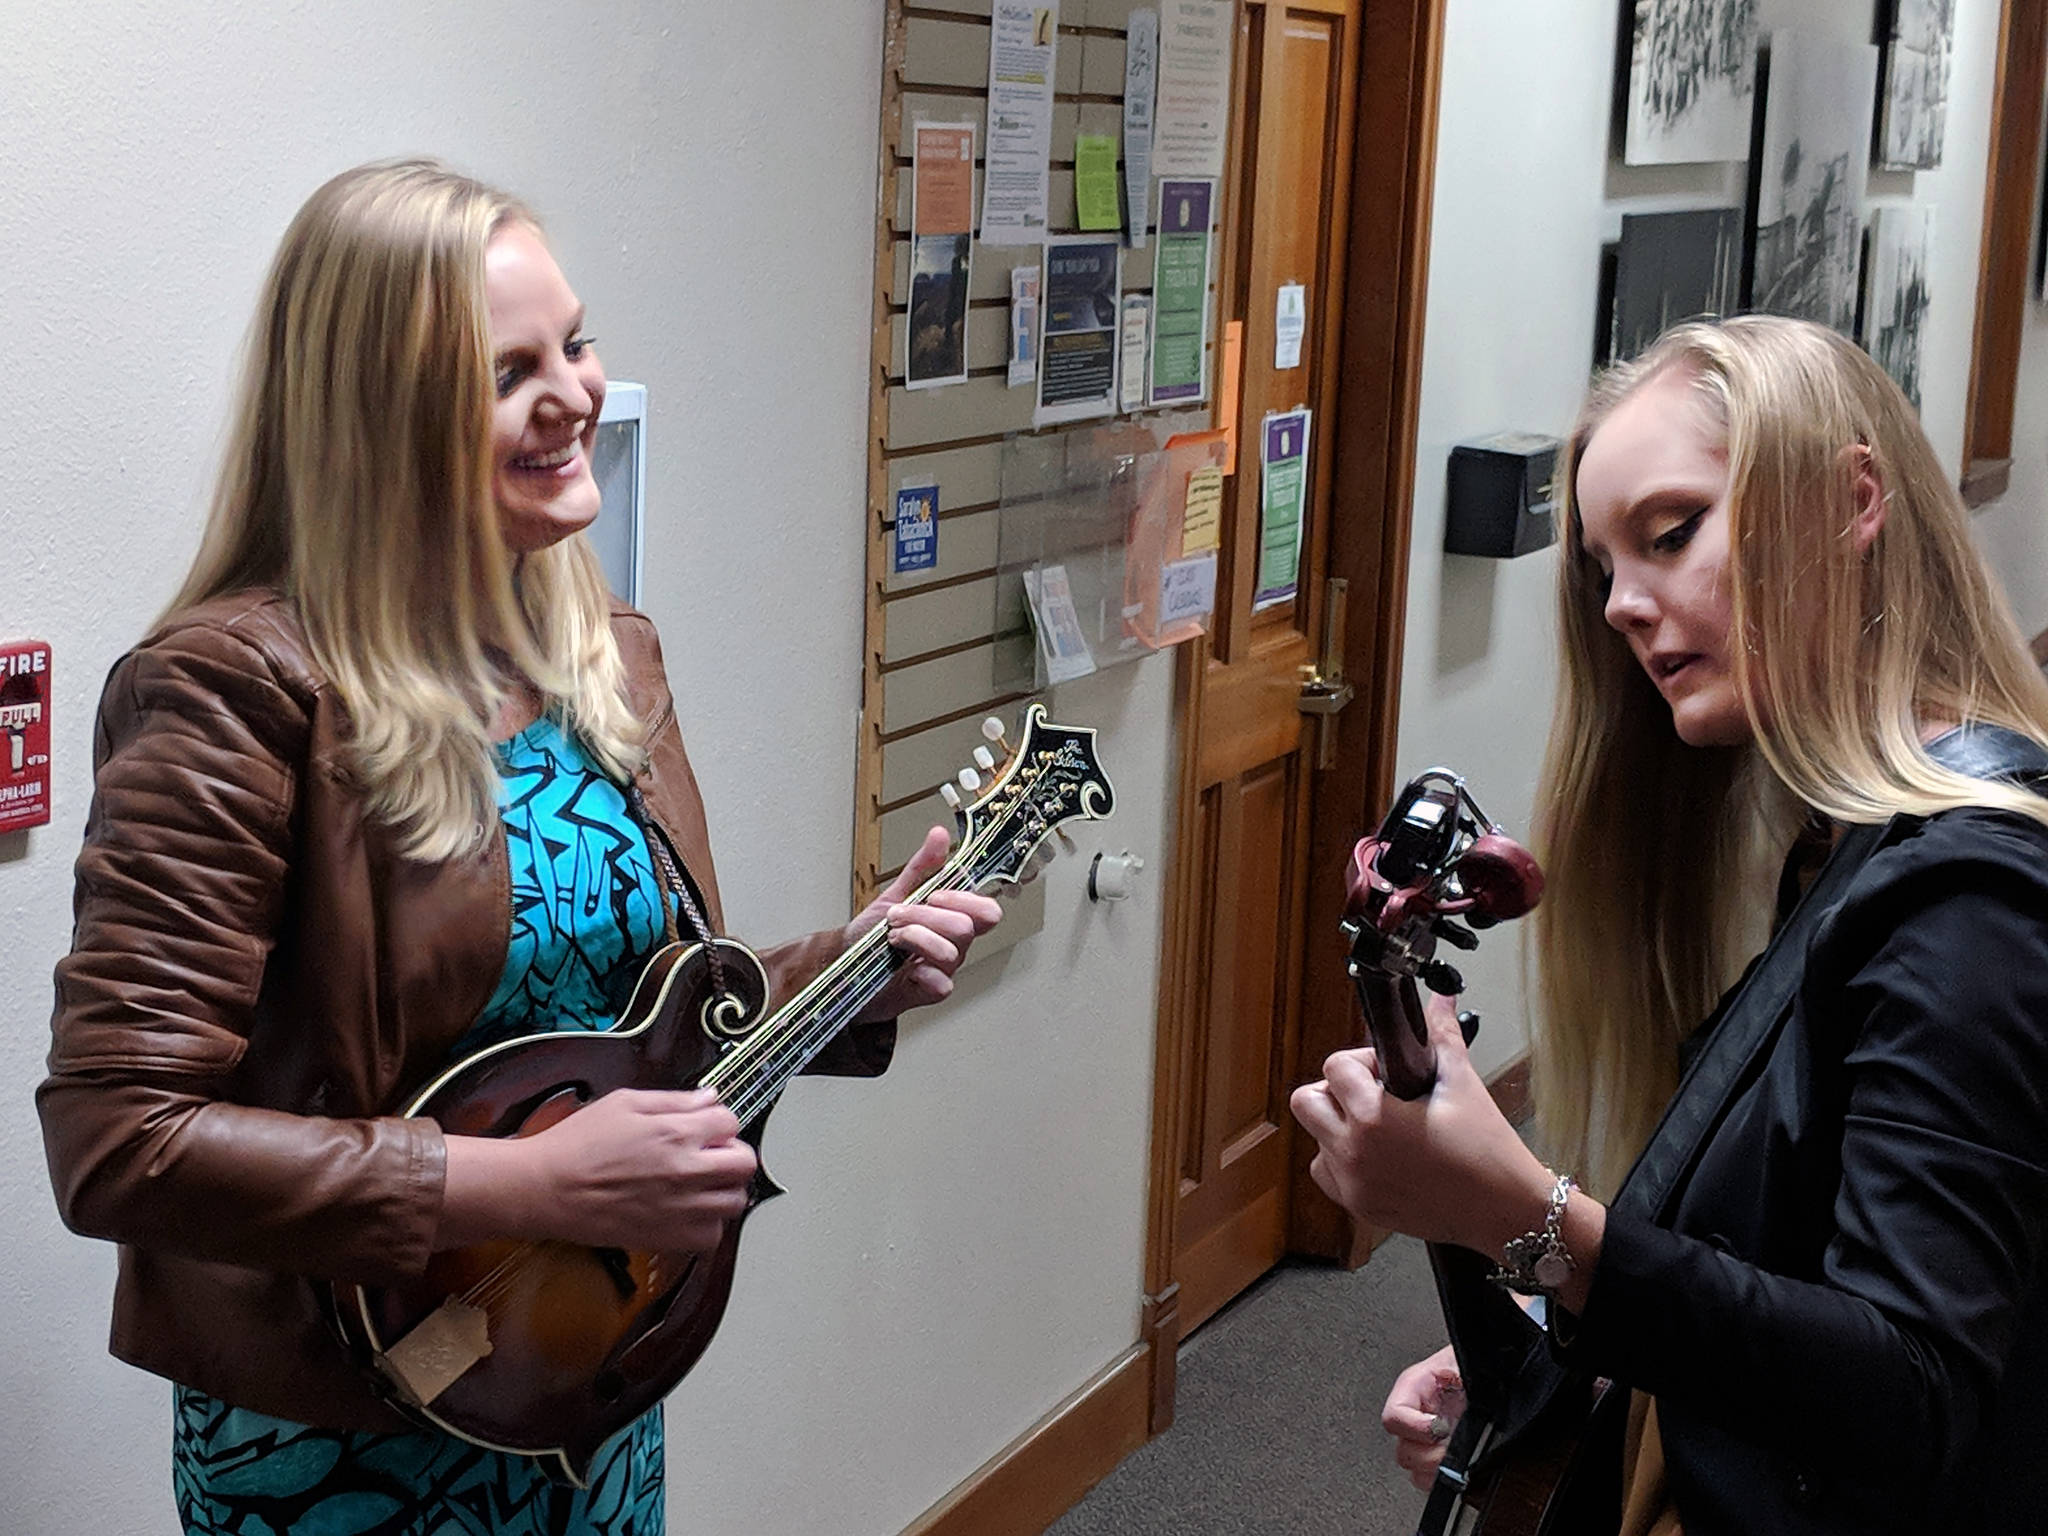 Laura and Abigail Zahasky warm up before playing a bluegrass-influenced set at the Joy of Strings guitarist showcase. The sisters were the only act to include an instrument that wasn’t a guitar. Laura Zahasky swapped out a guitar for a mandolin and Abigail Zahasky accompanied her on the banjo. (Ben Hohenstatt | Capital City Weekly)